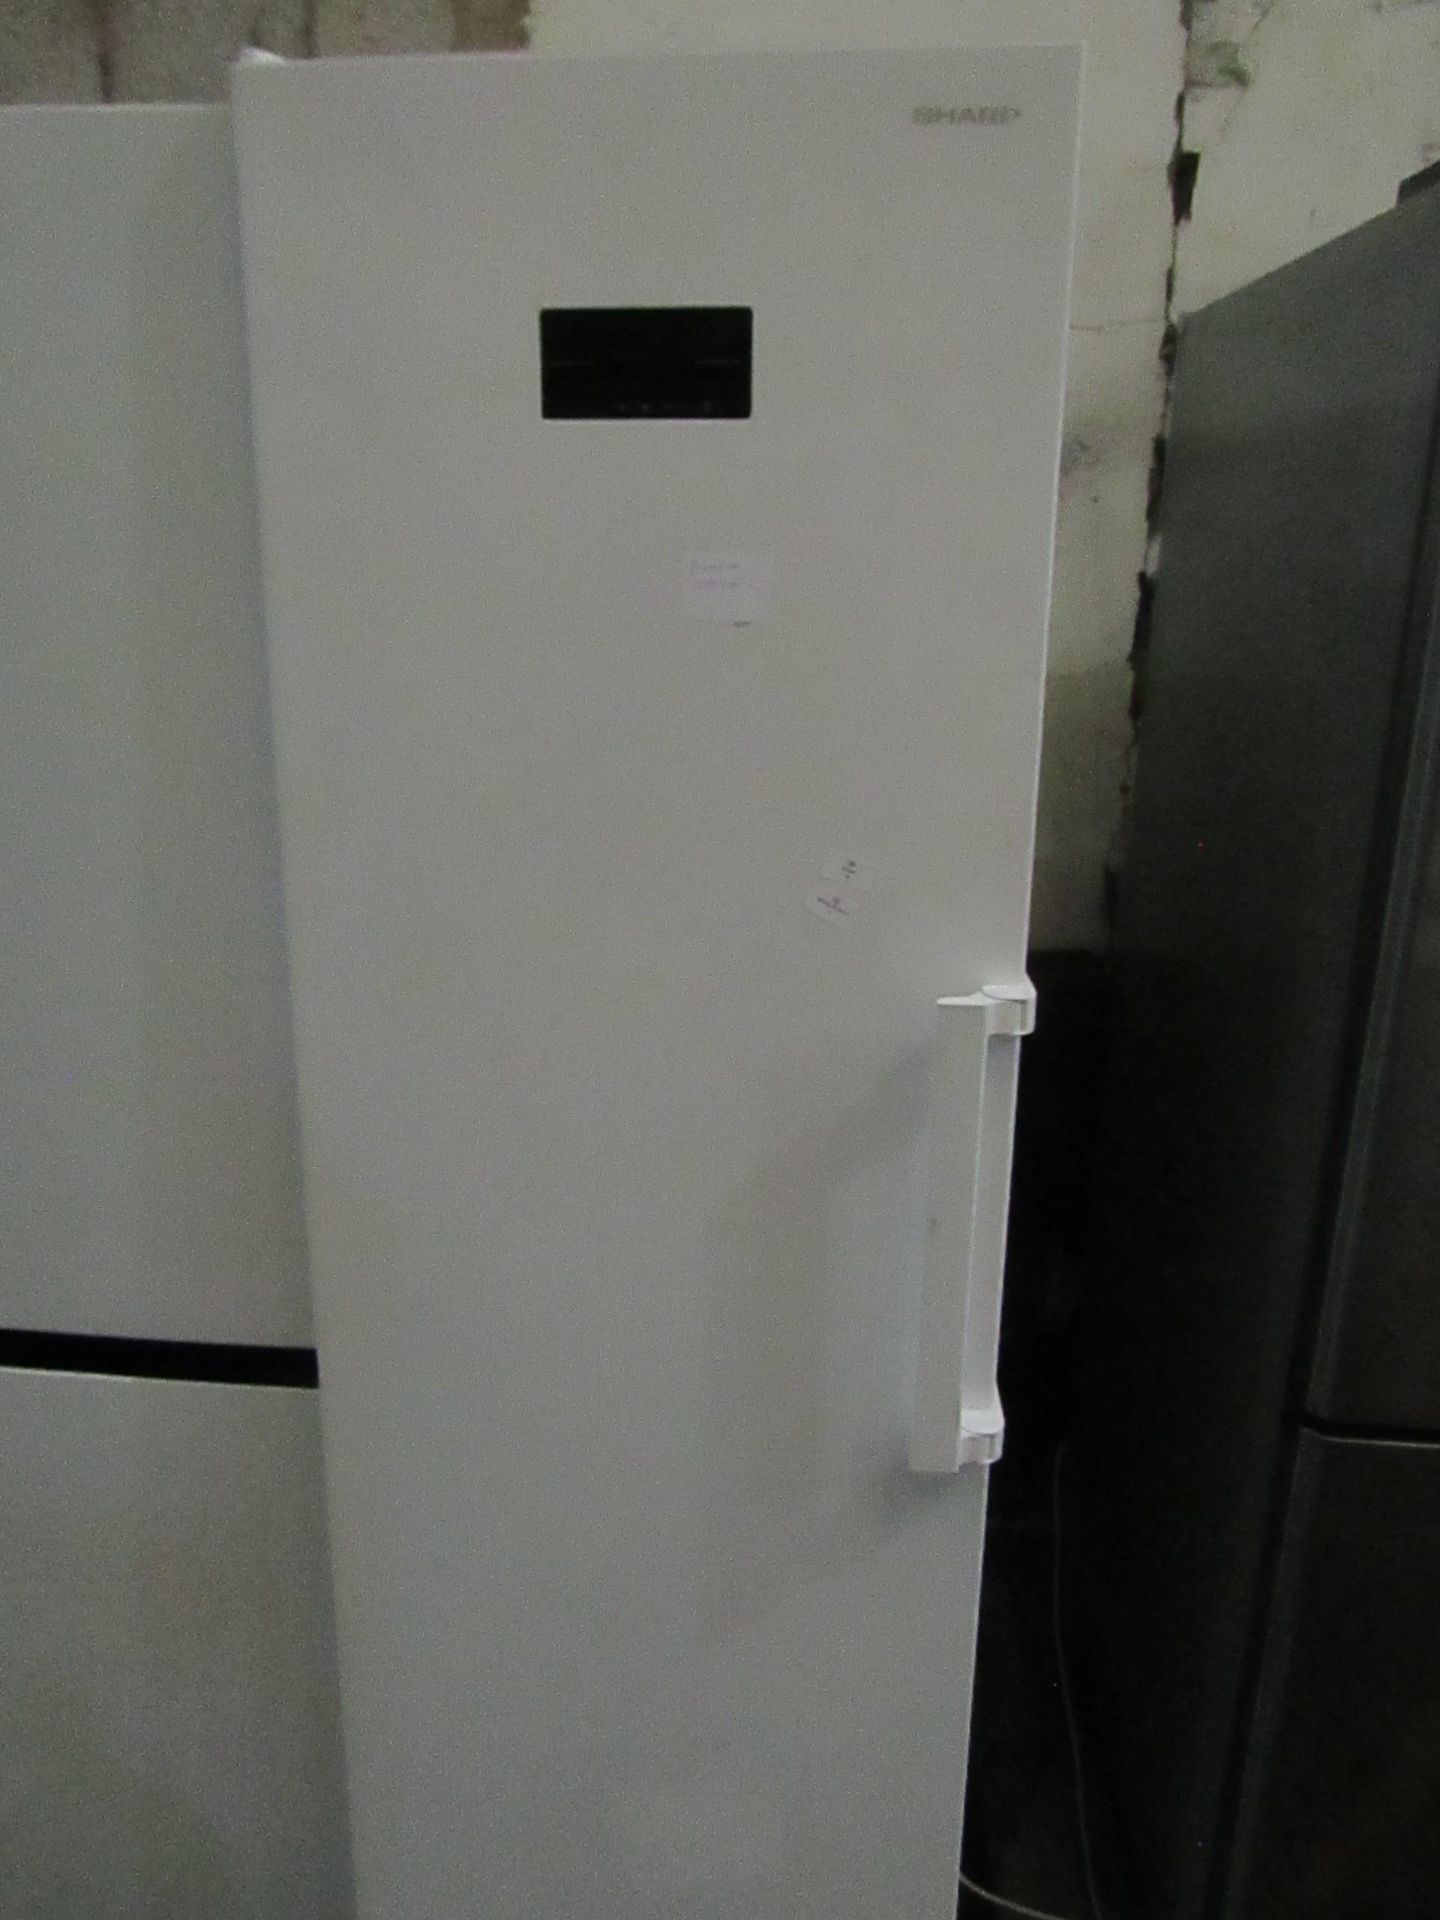 Sharp tall free standing freezer, tested working for coldness - Image 2 of 2